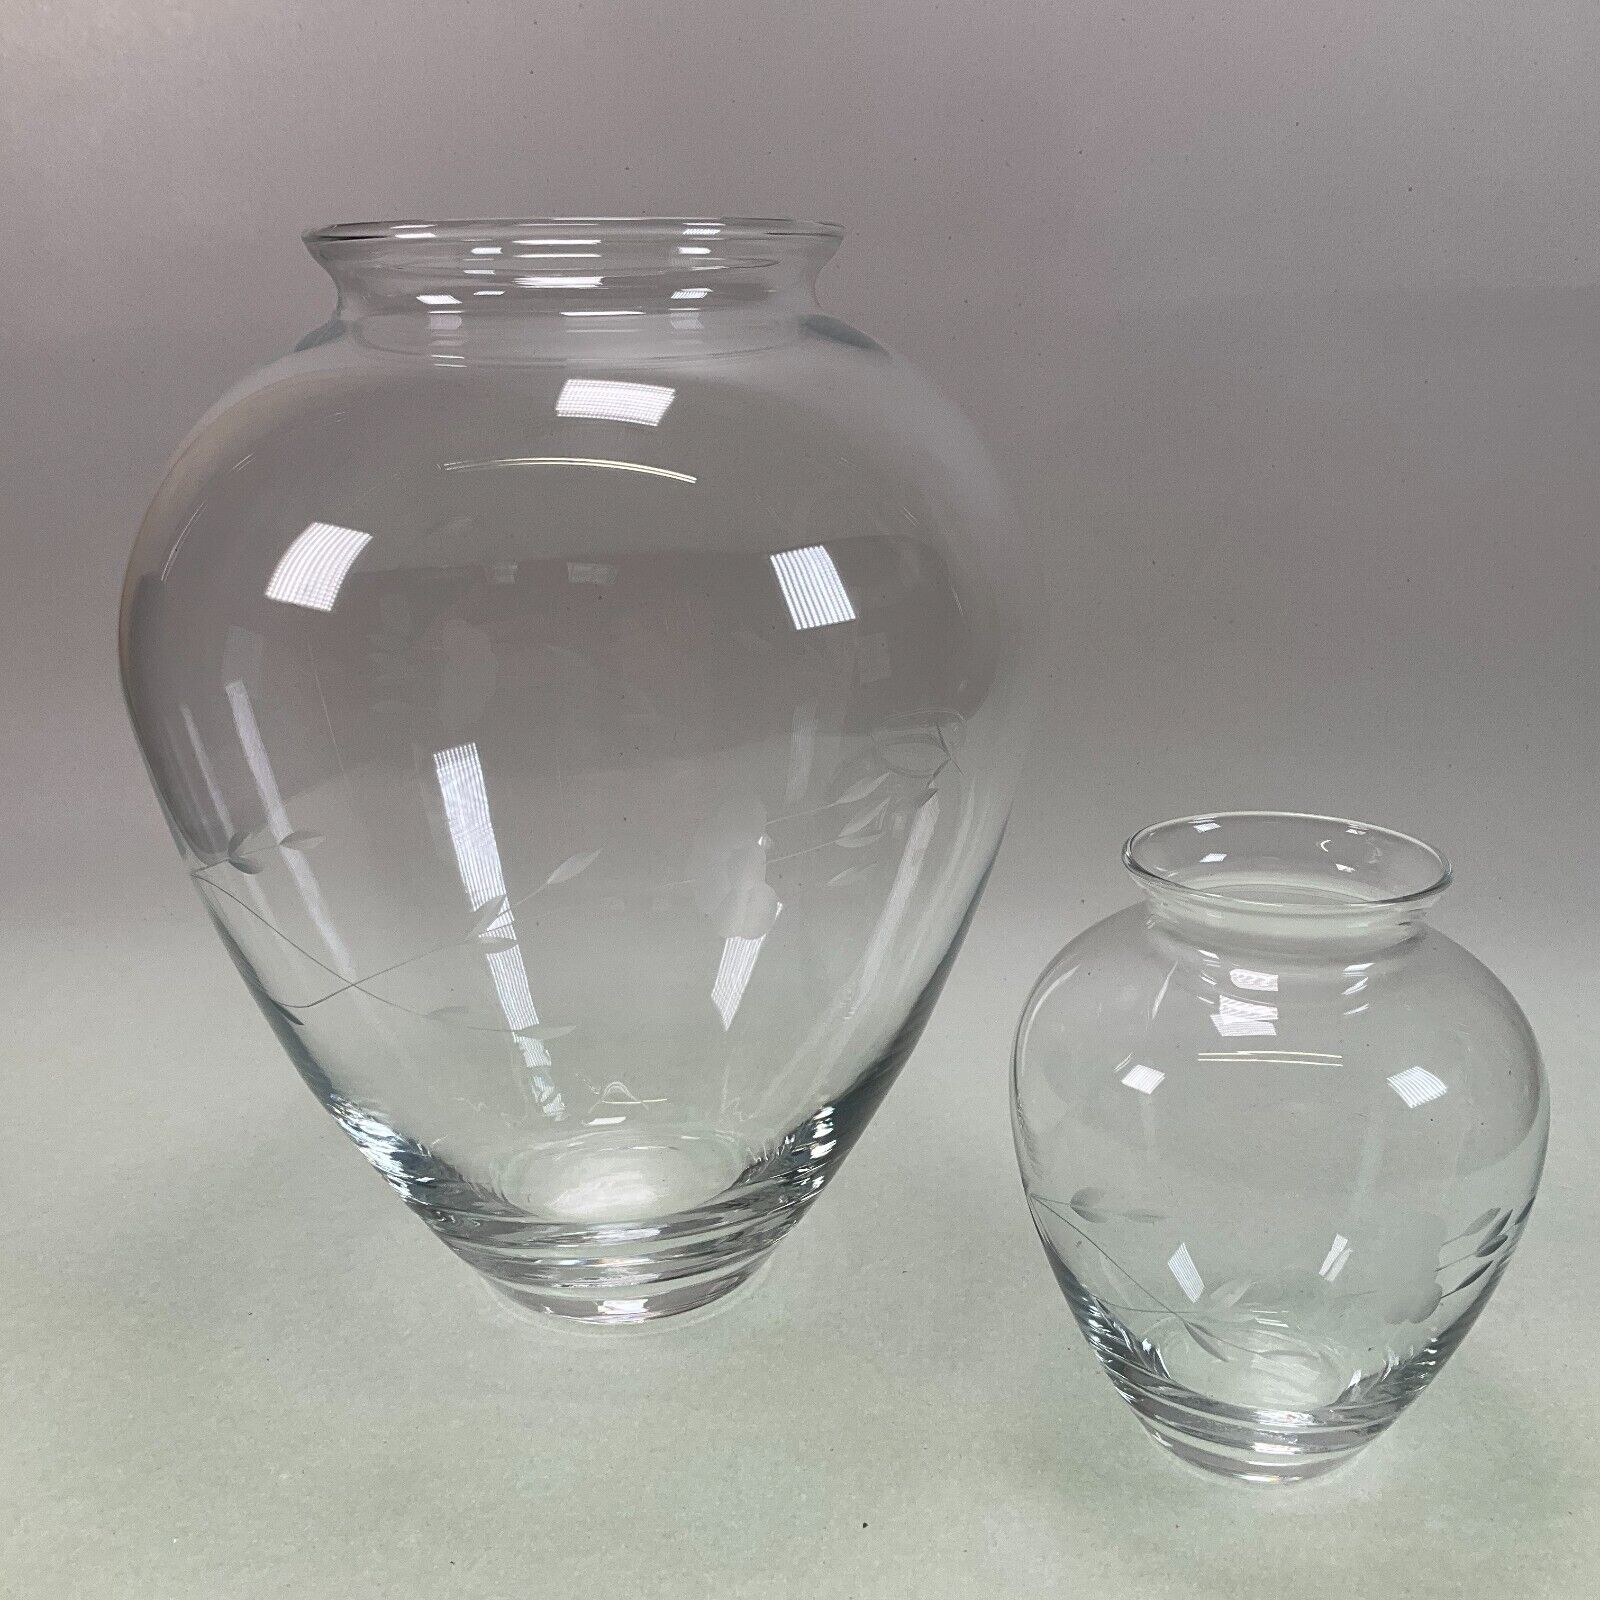 Princess House Heritage Crystal #323 Set Of 2 Vases Etched Boxed